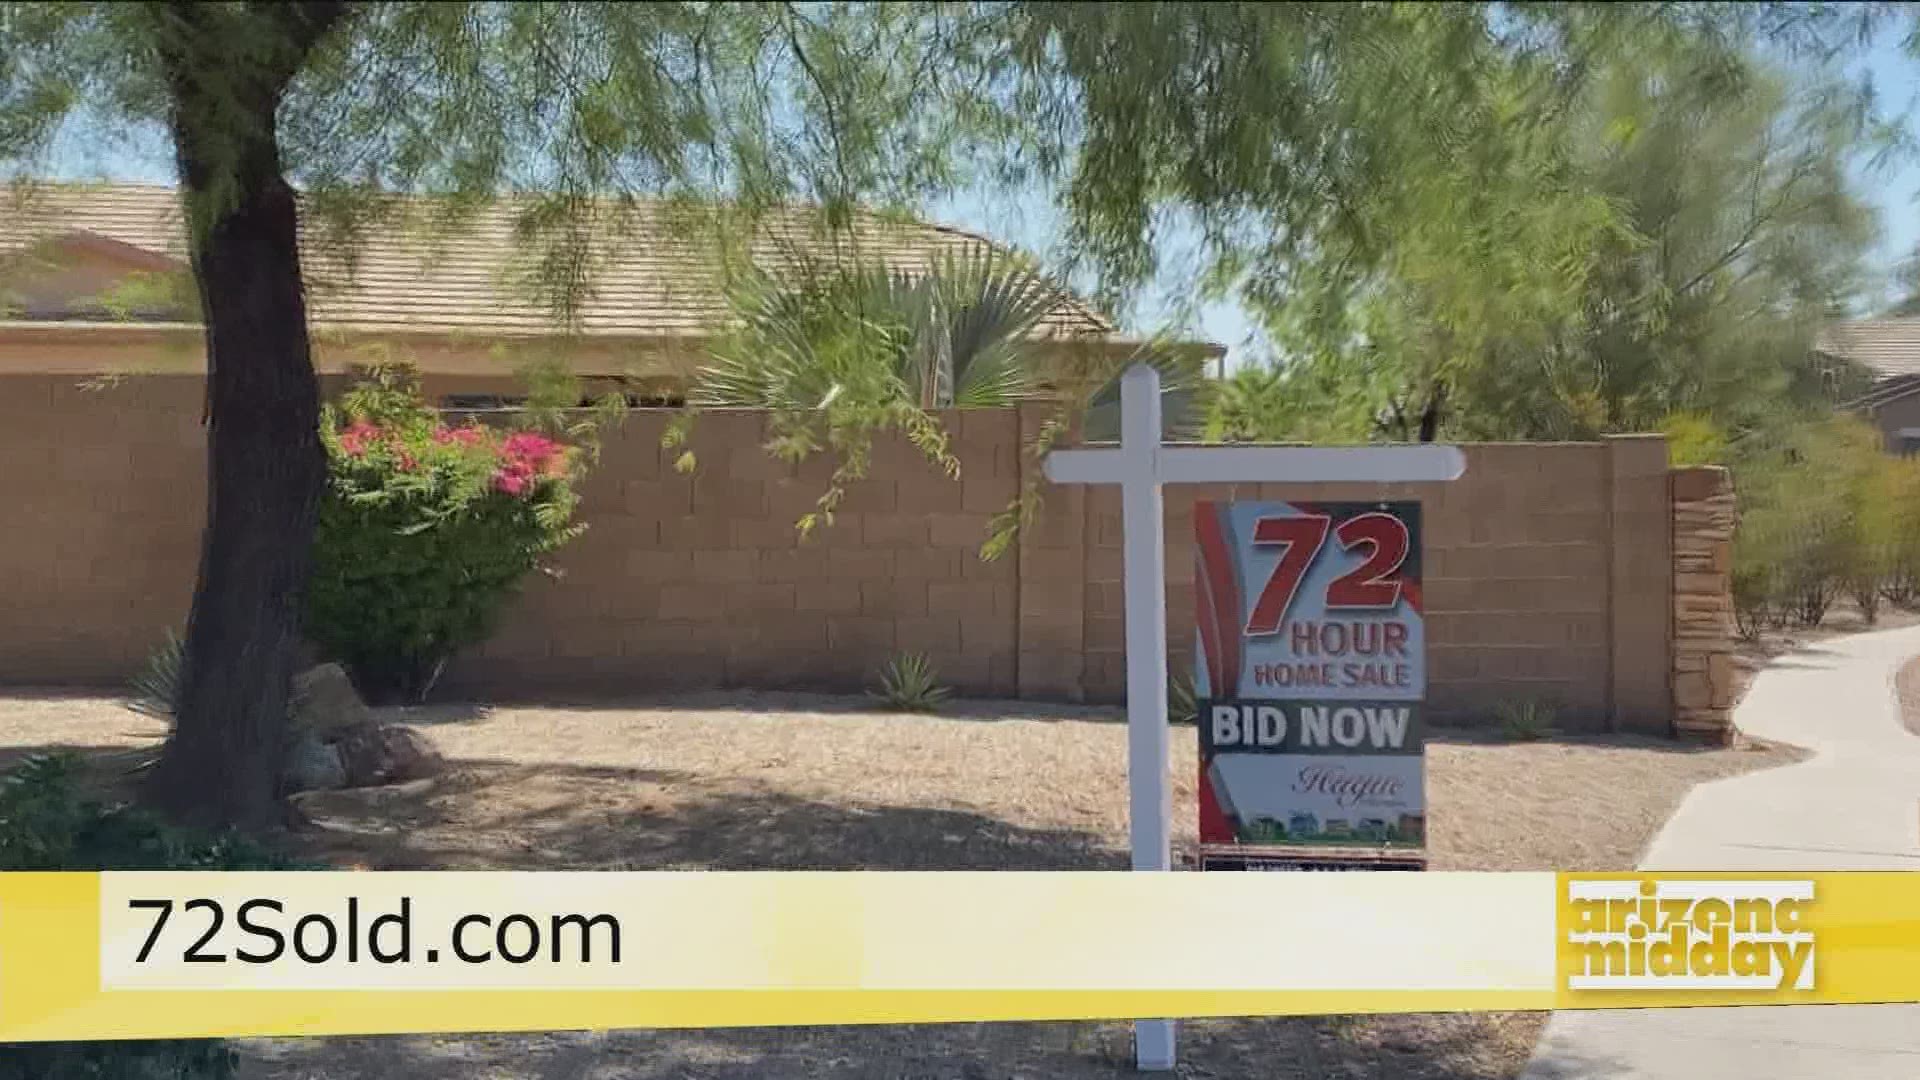 Thinking of selling? Greg Hague tells us how to get the best price on your home at 72SOLD.com